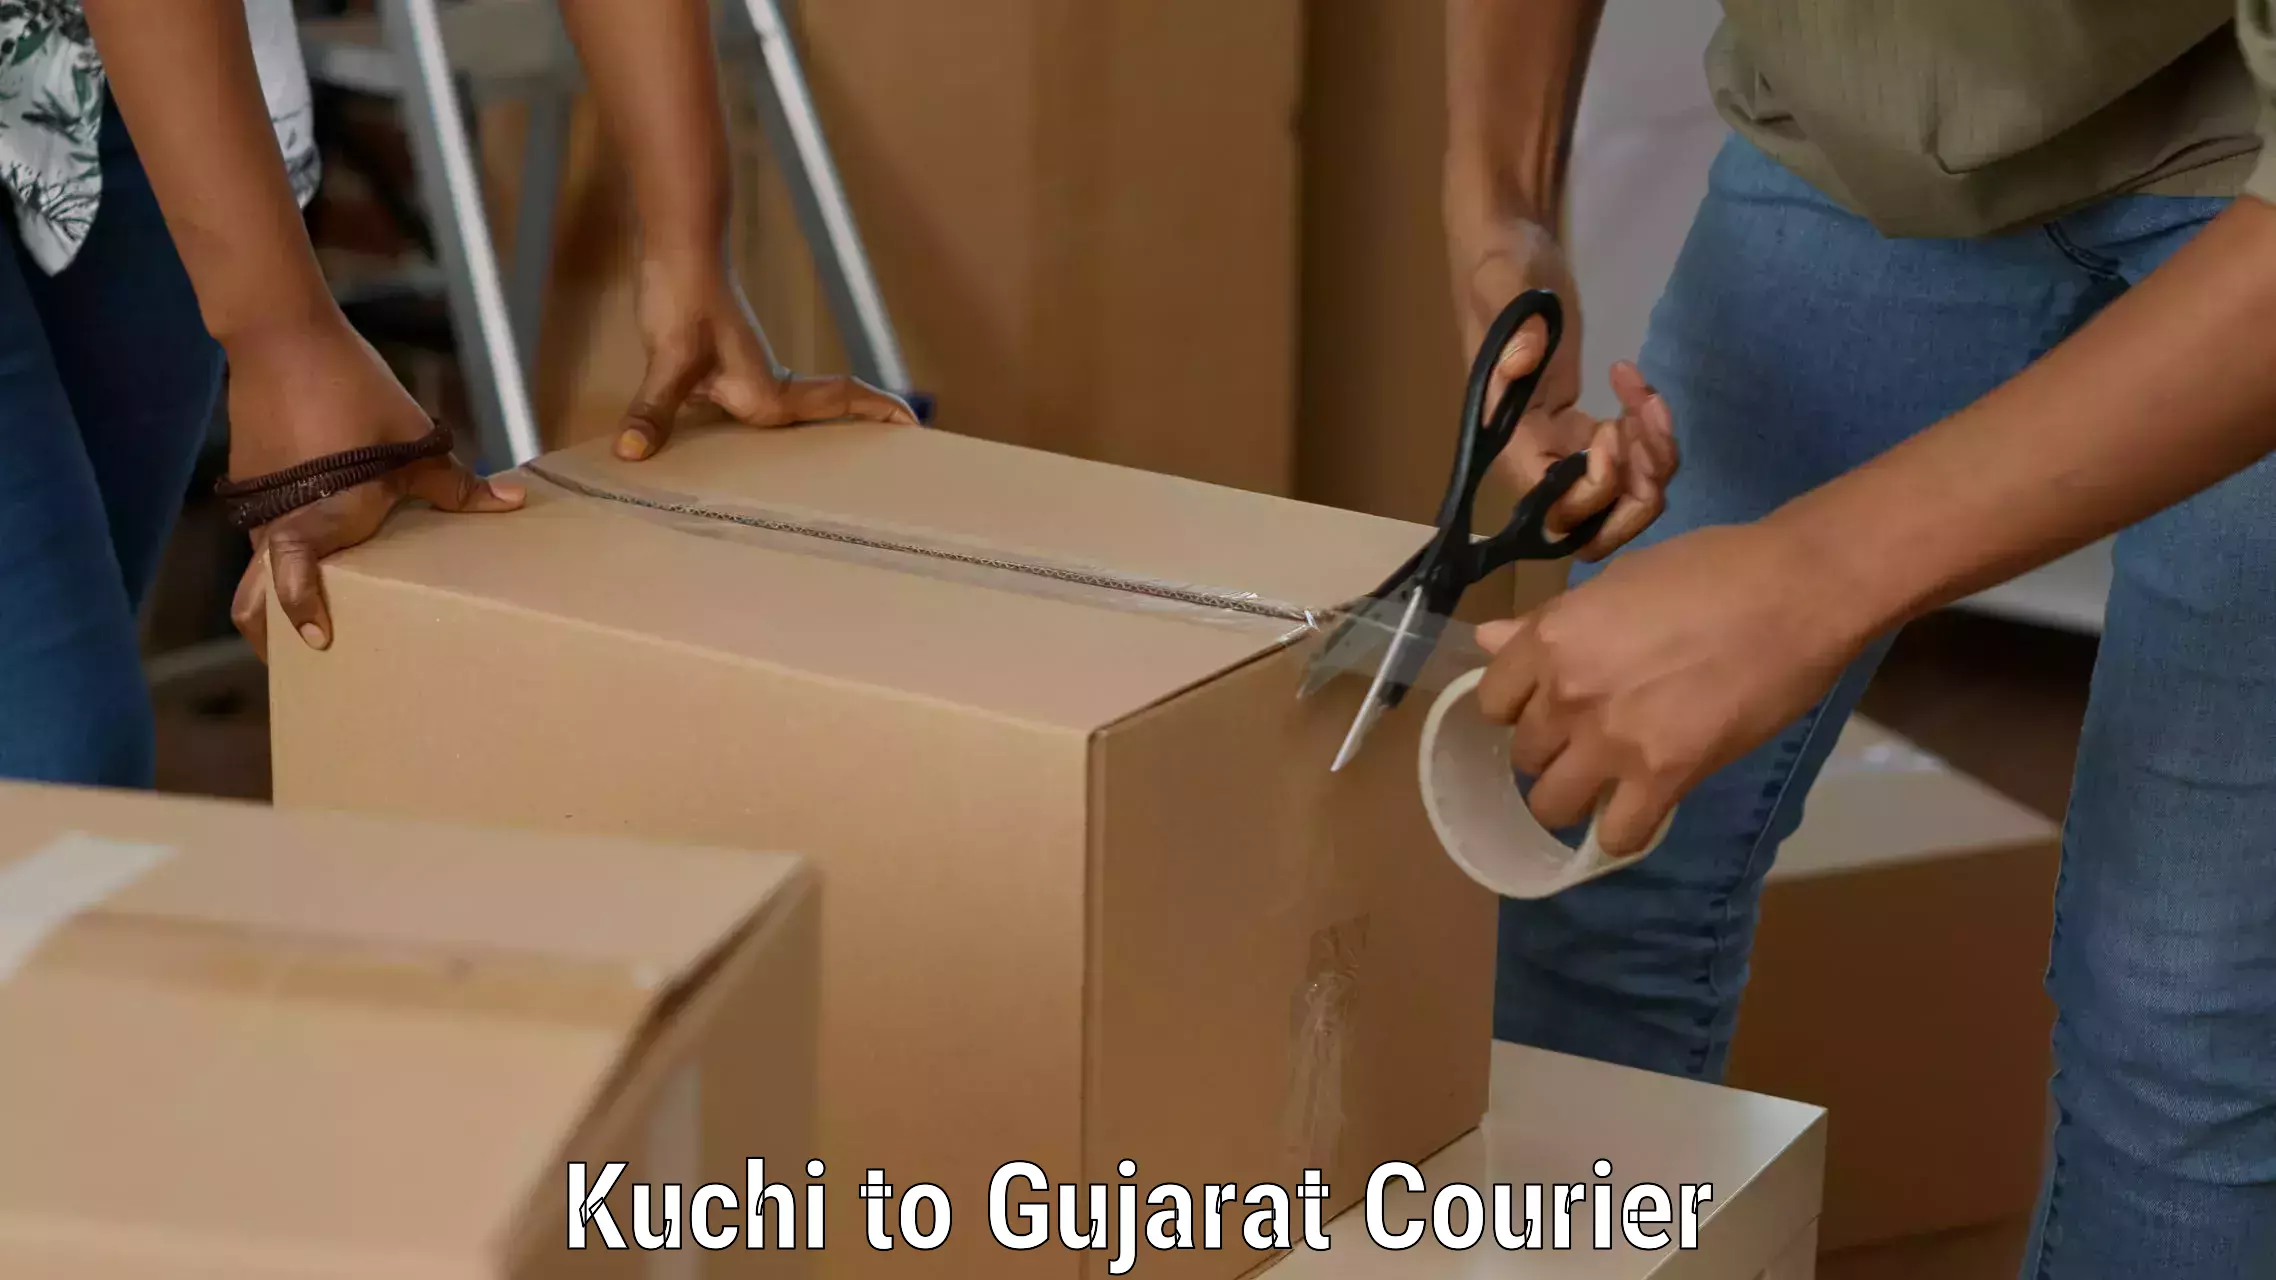 Reliable delivery network Kuchi to Gujarat